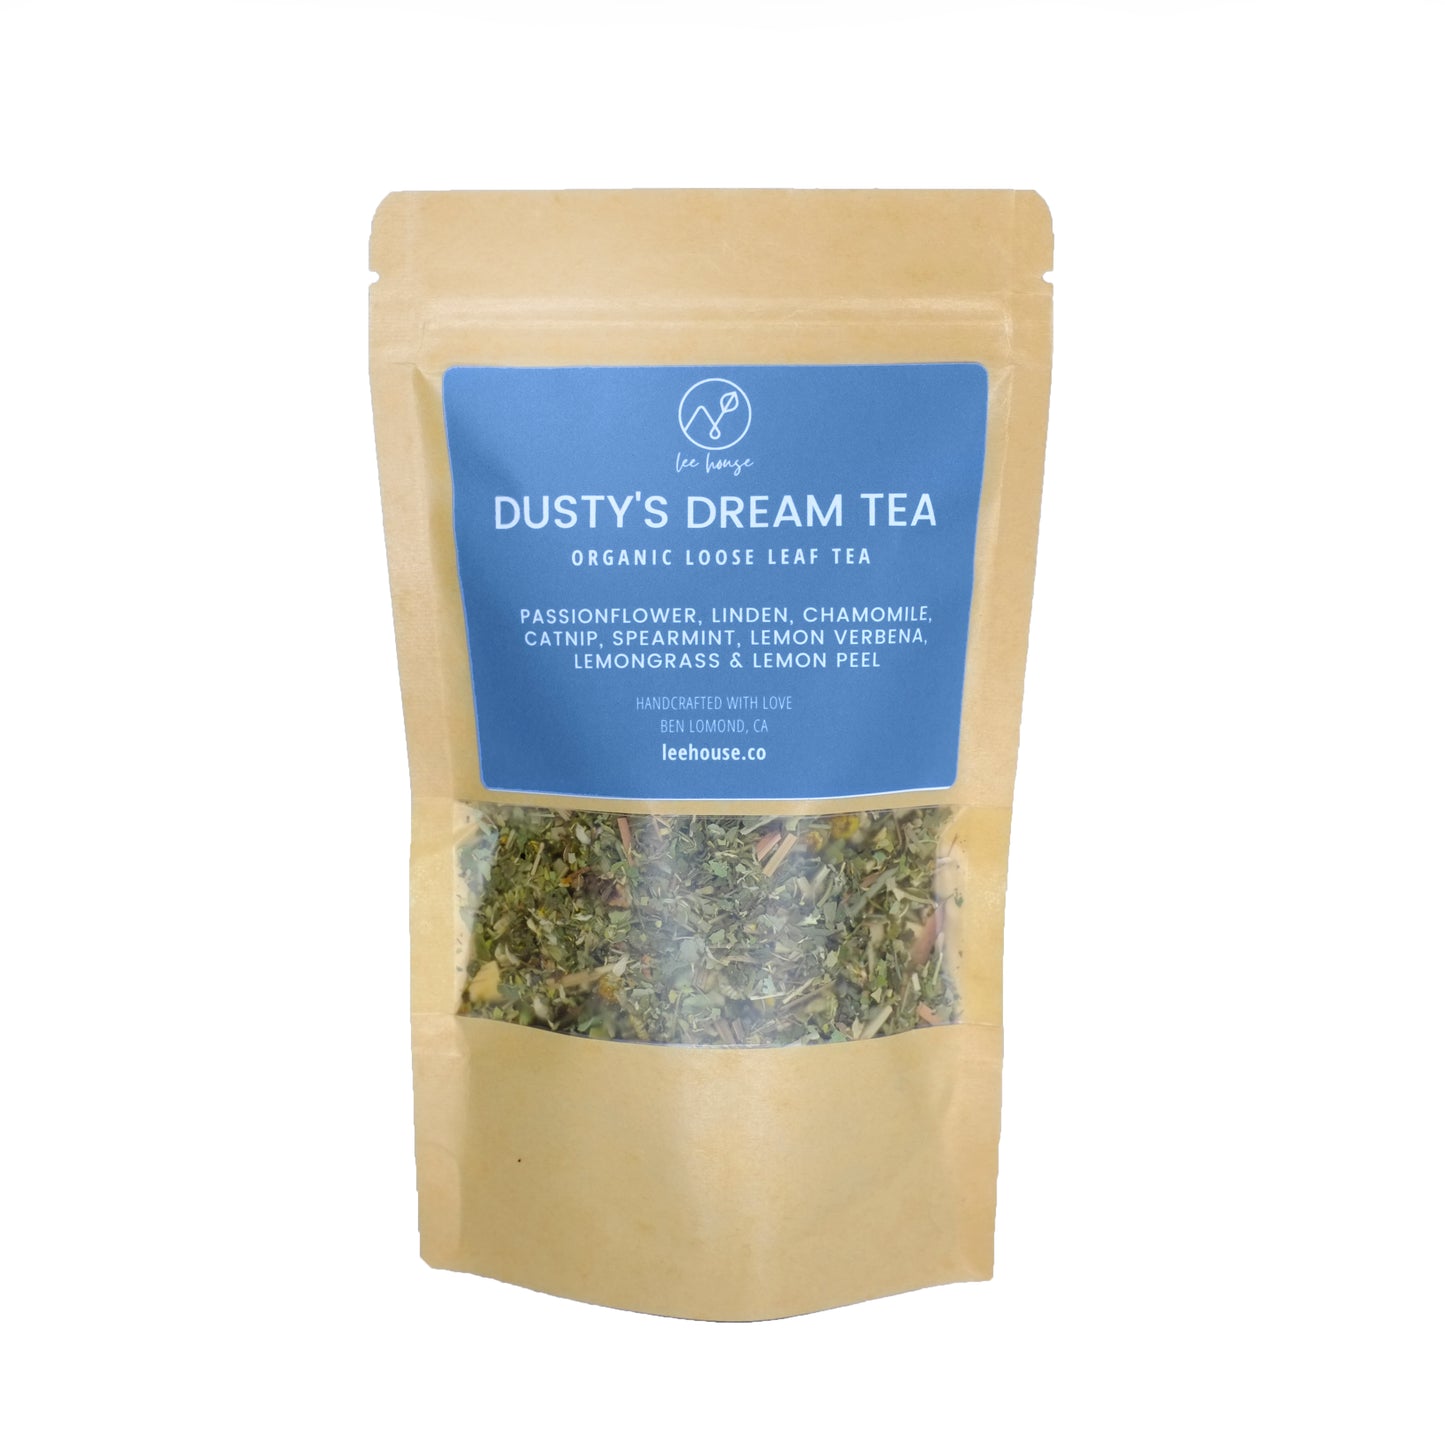 Dusty's Dream Tea from Lee House, organic loose leaf blend visible in kraft paper bag with blue label. Contains Passionflower, Linden, Chamomile, Catnip, Spearmint, Lemon Verbena, Lemongrass, Lemon Peel. Crafted in Ben Lomond, CA – leehouse.co.